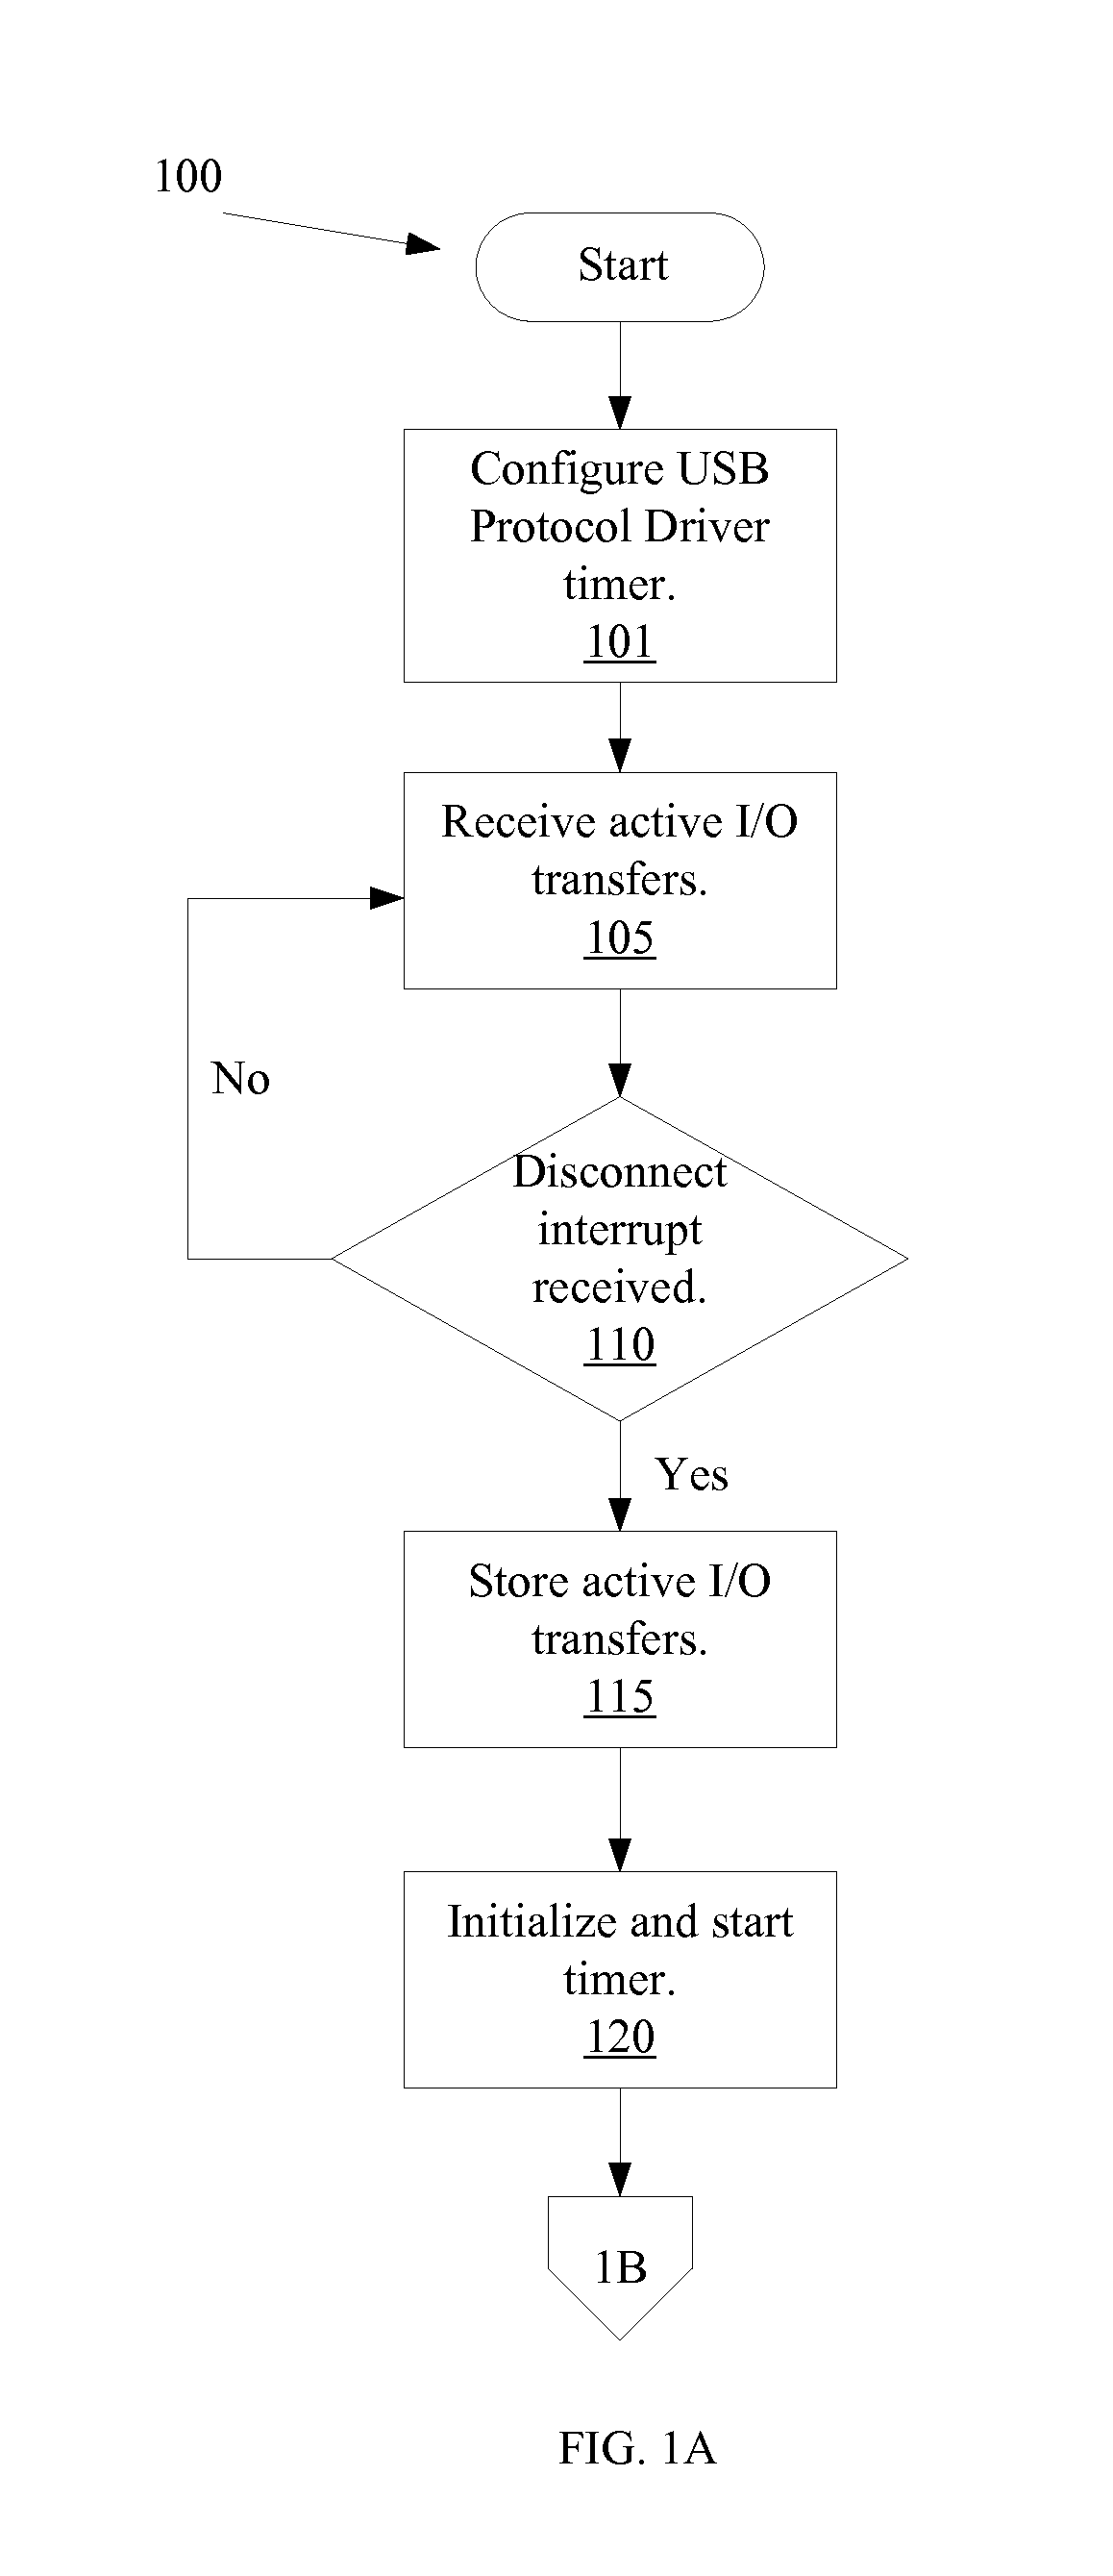 Continuously transferring data using a USB mass storage device